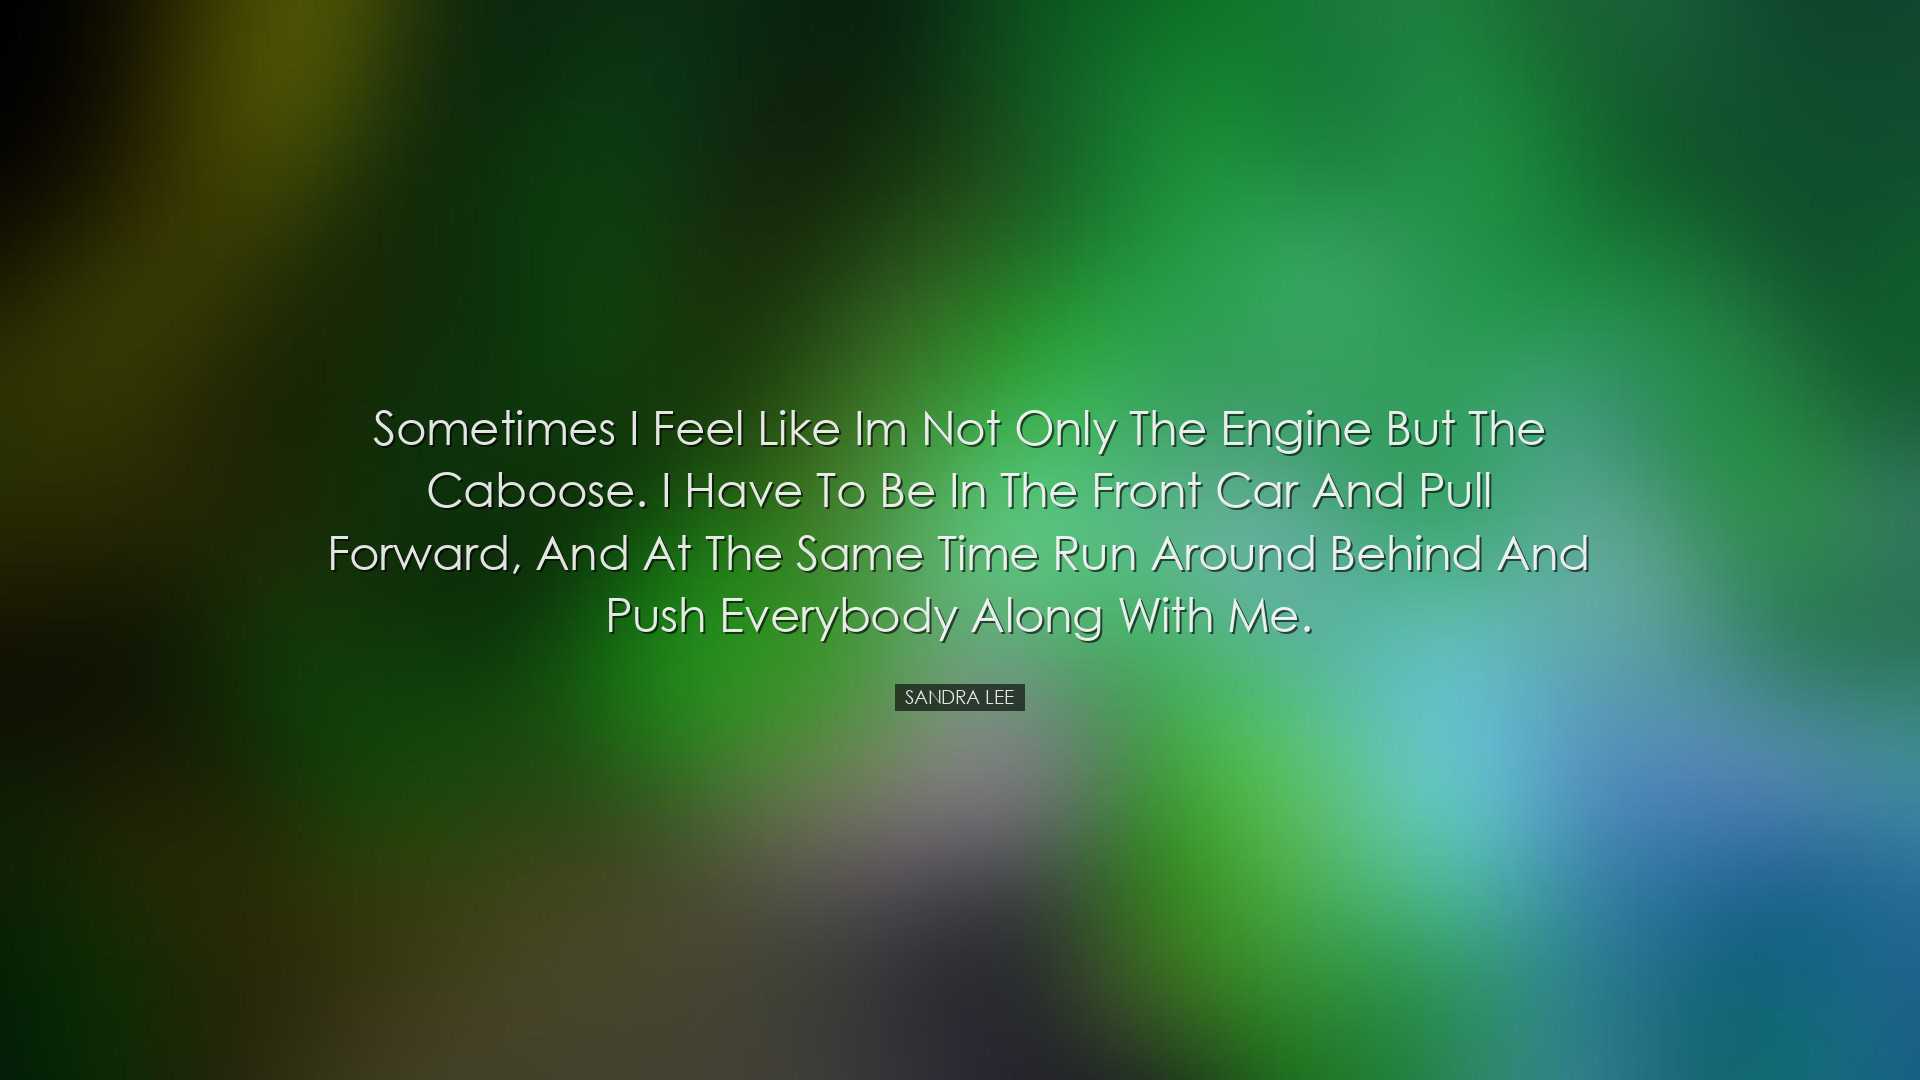 Sometimes I feel like Im not only the engine but the caboose. I ha